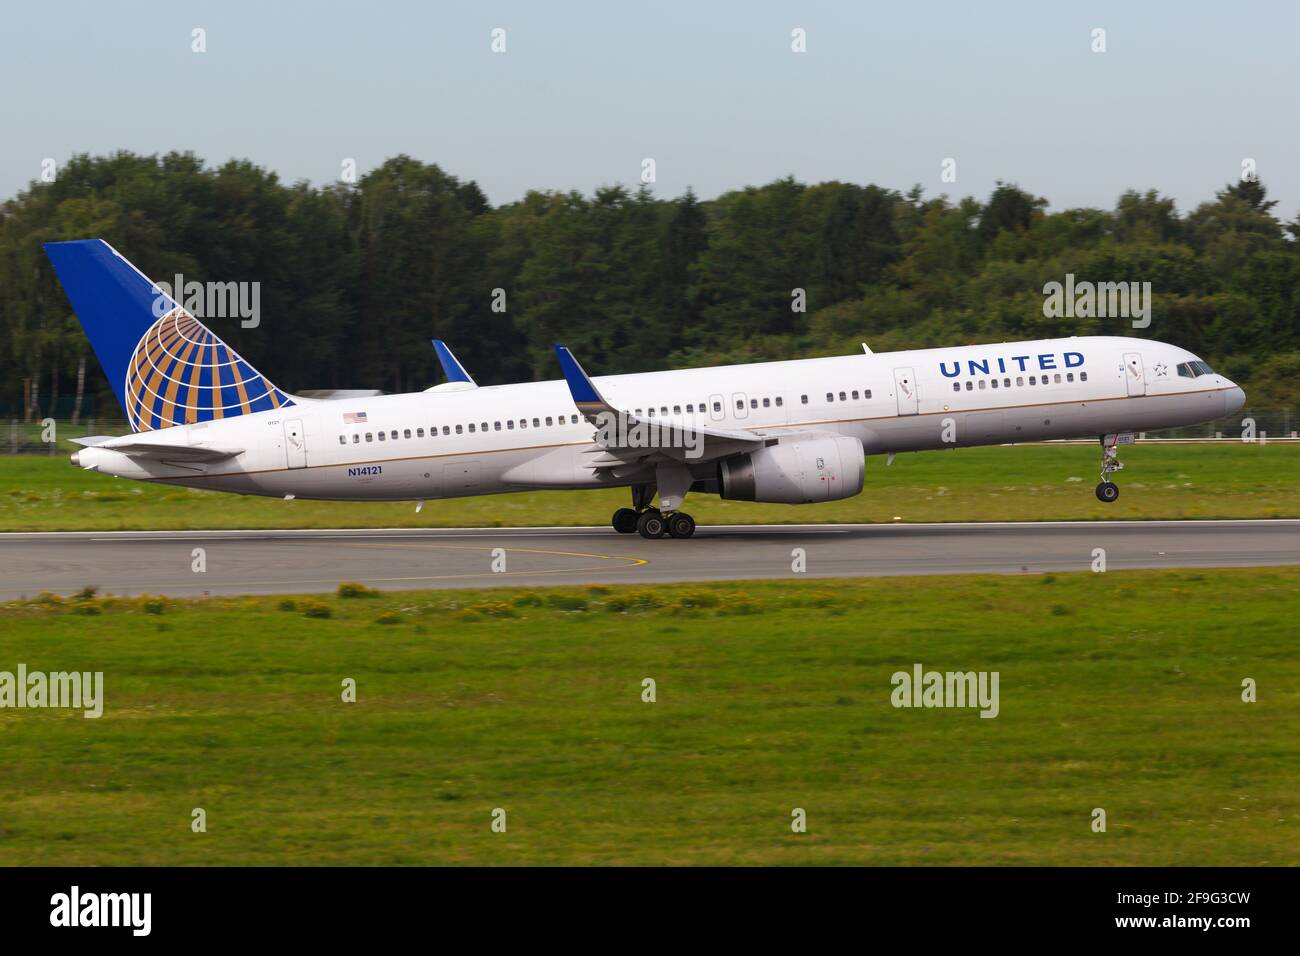 Hamburg, Germany - 03. September 2015: United Airlines Boeing 757-200 at Hamburg airport (HAM) in Germany. Boeing is an aircraft manufacturer based in Stock Photo